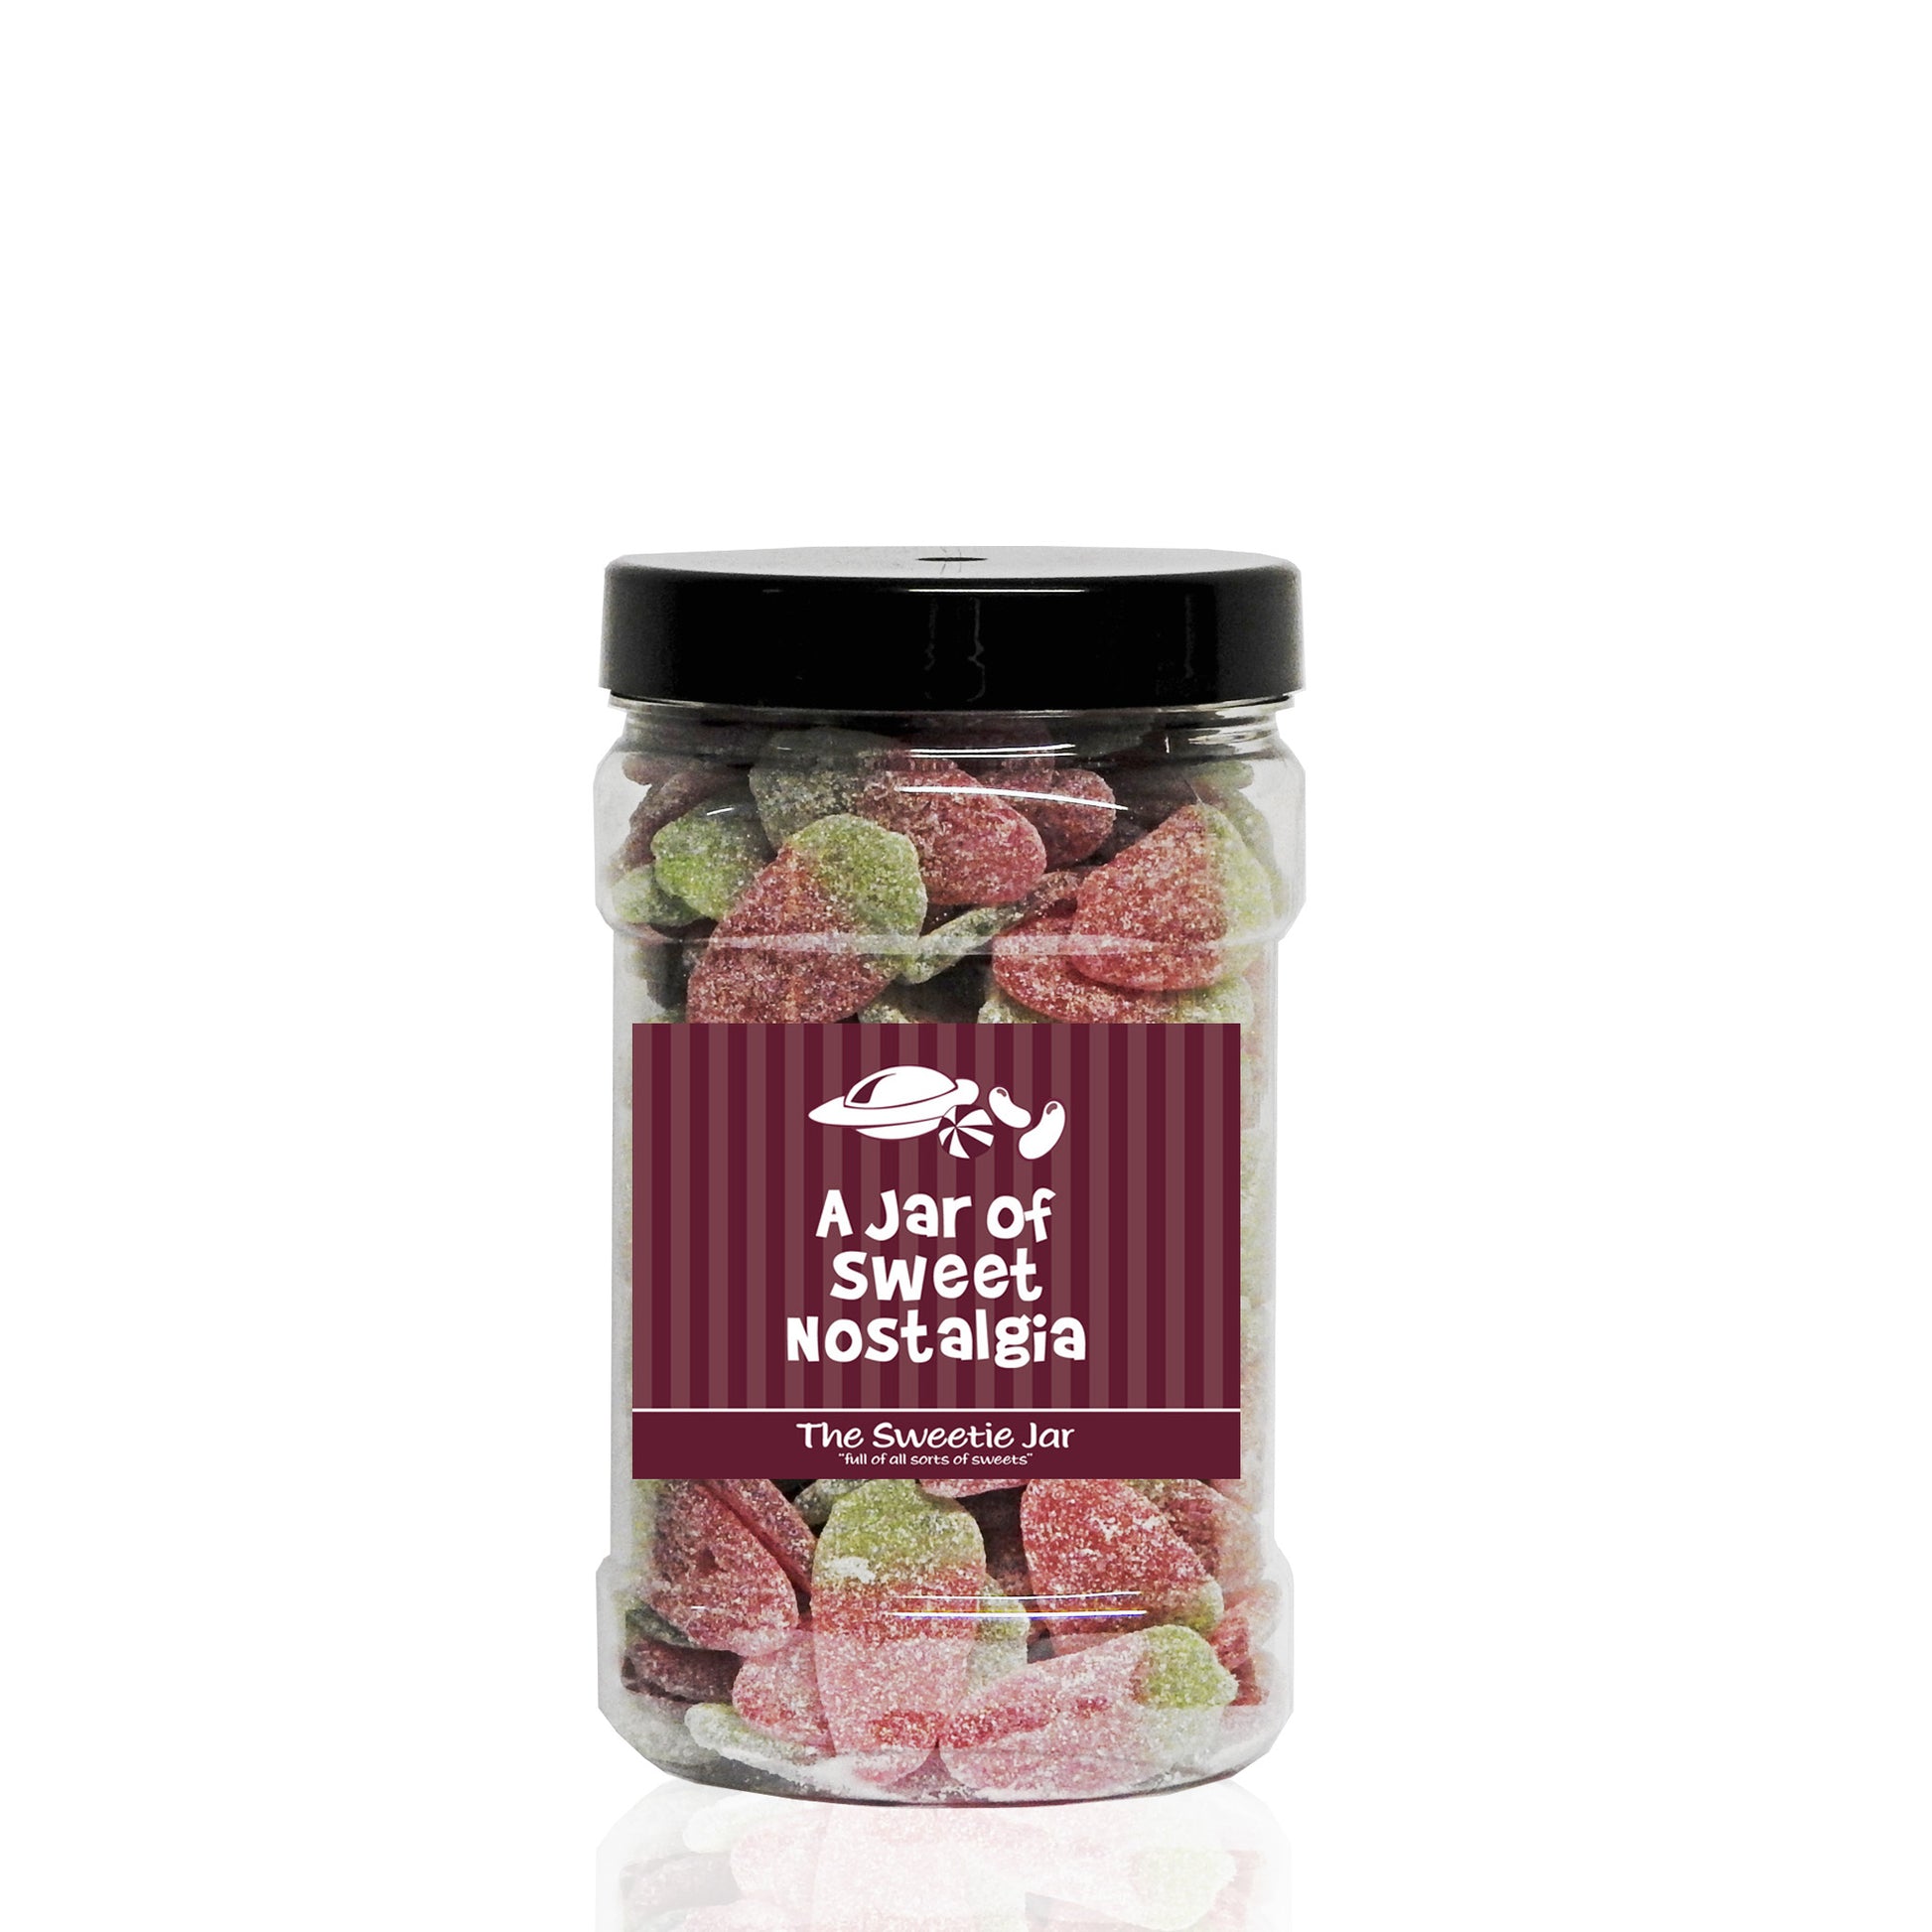 A Small Jar of Fizzy Strawberries - Sour Fruit Flavour Jelly Sweets at The Sweetie Jar